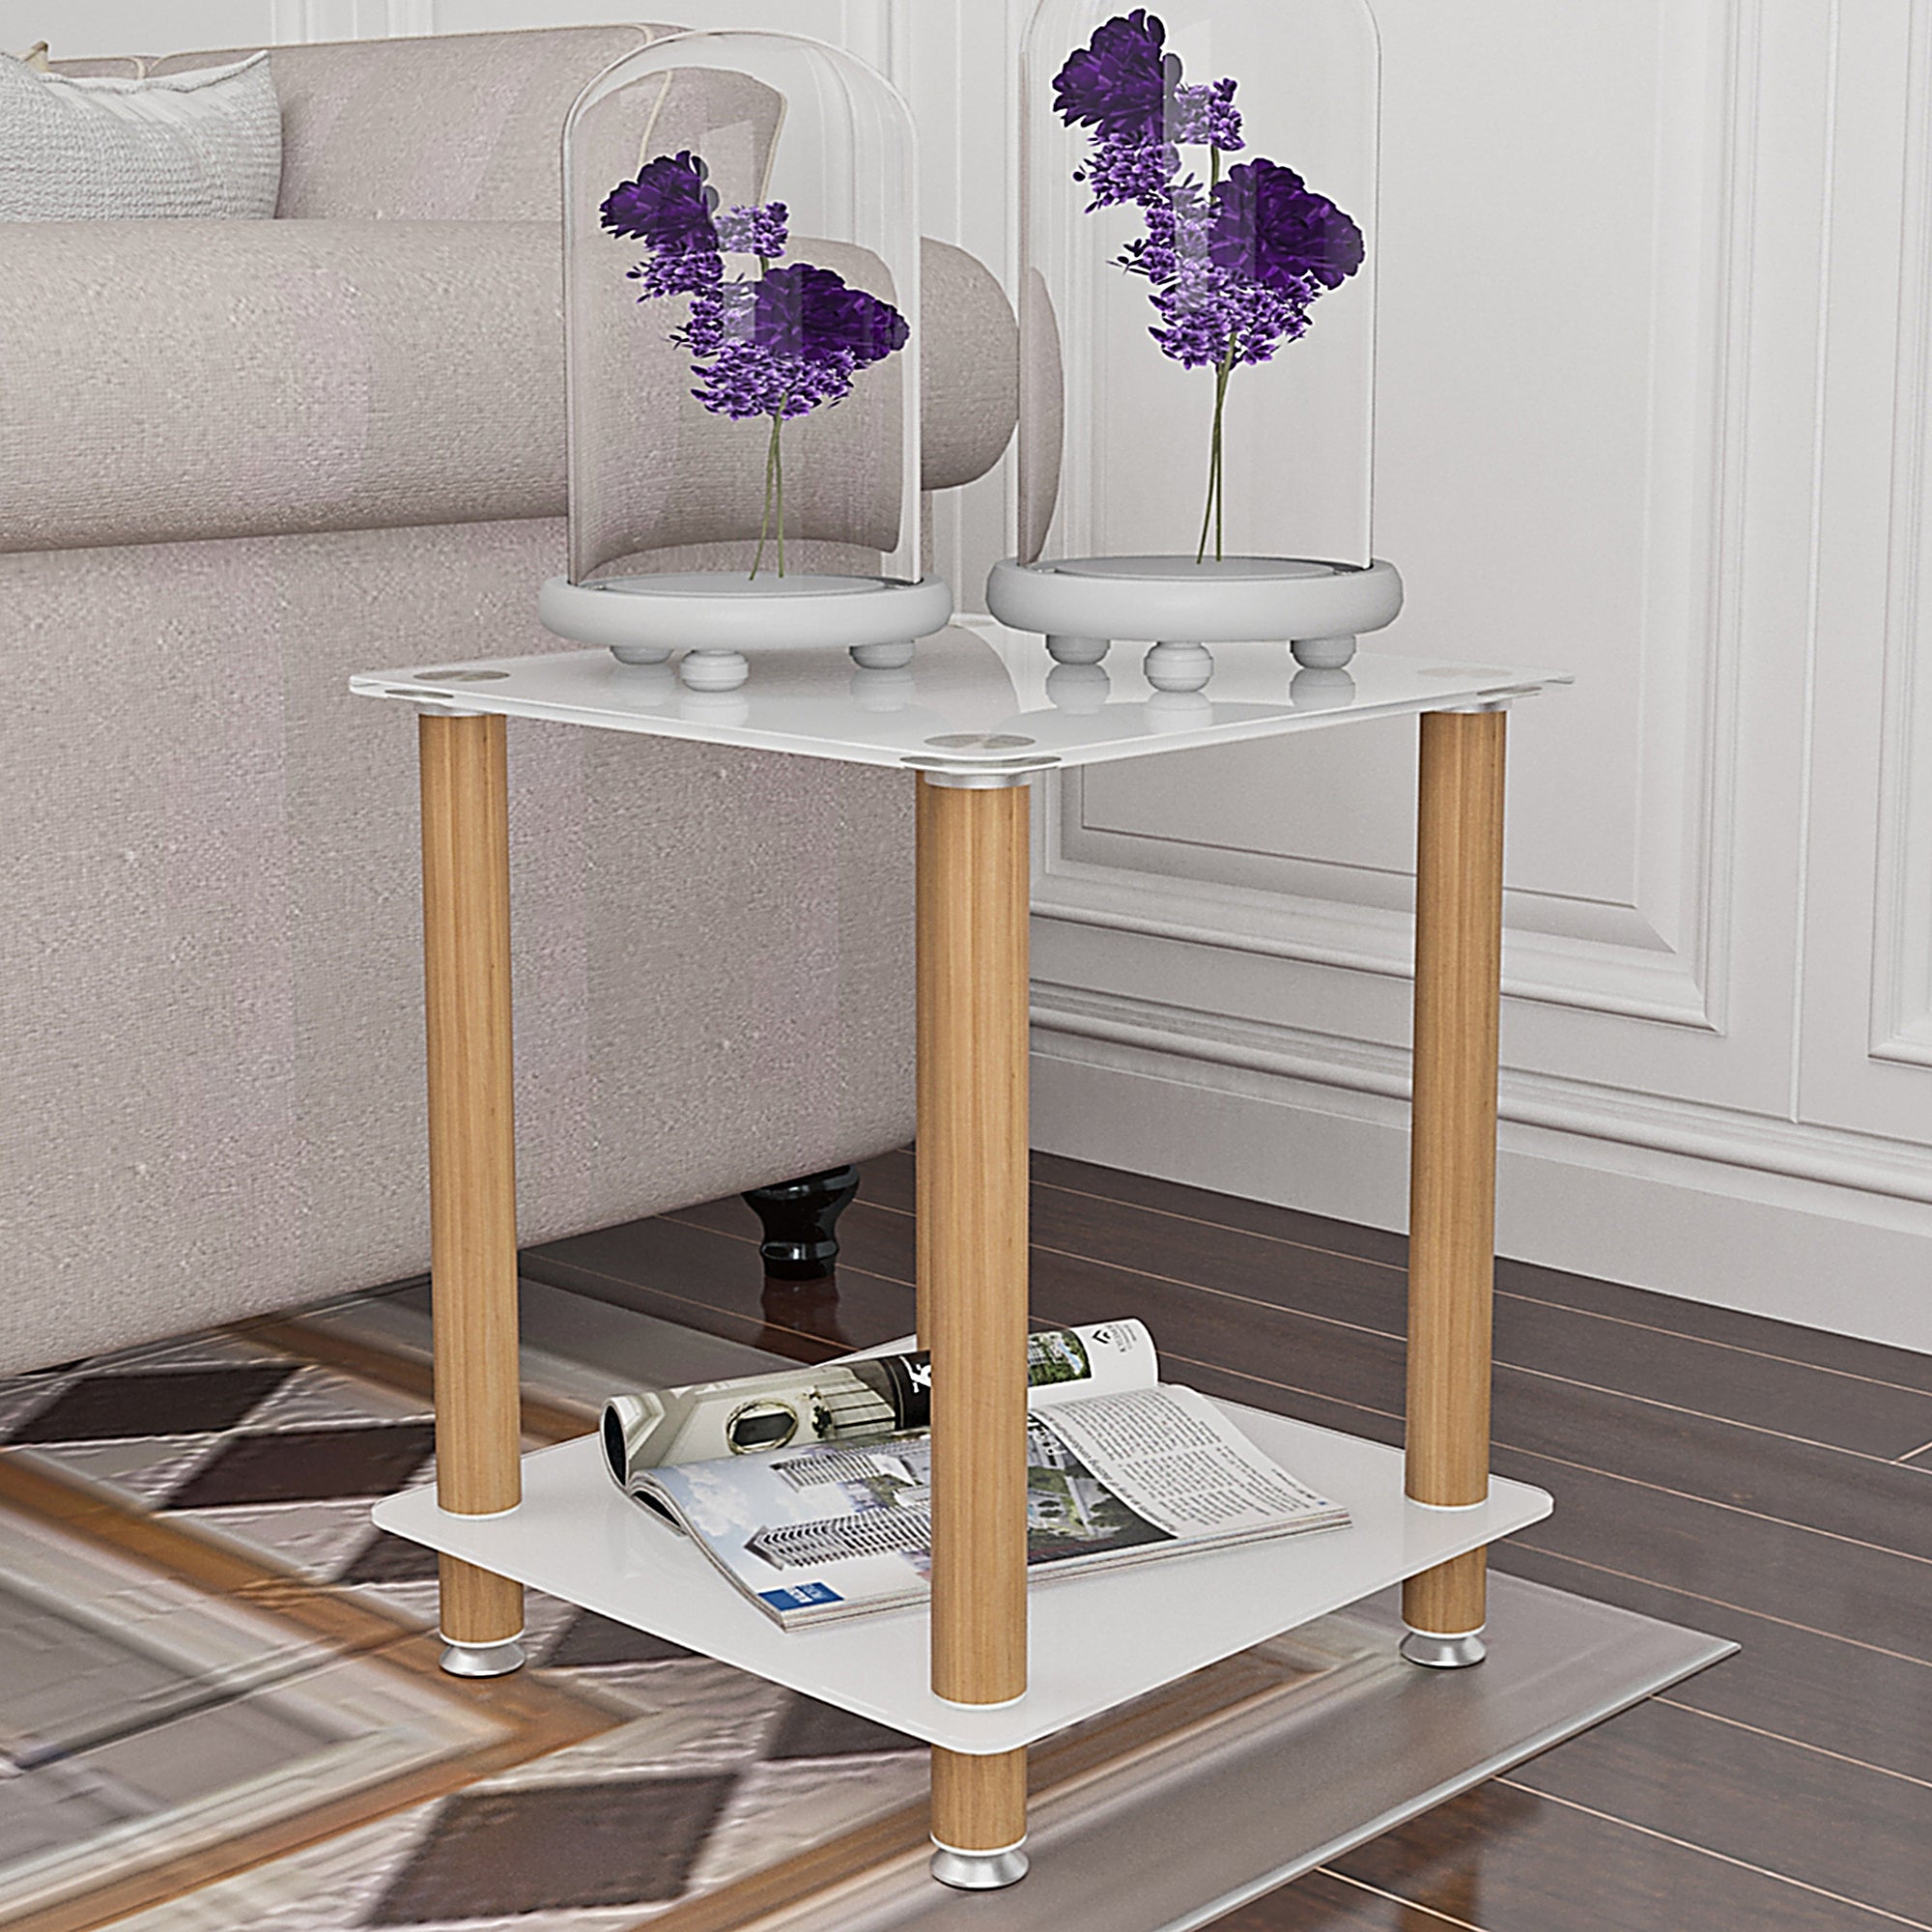 2-Tier End/Side Table with Storage Shelves, White+Oak